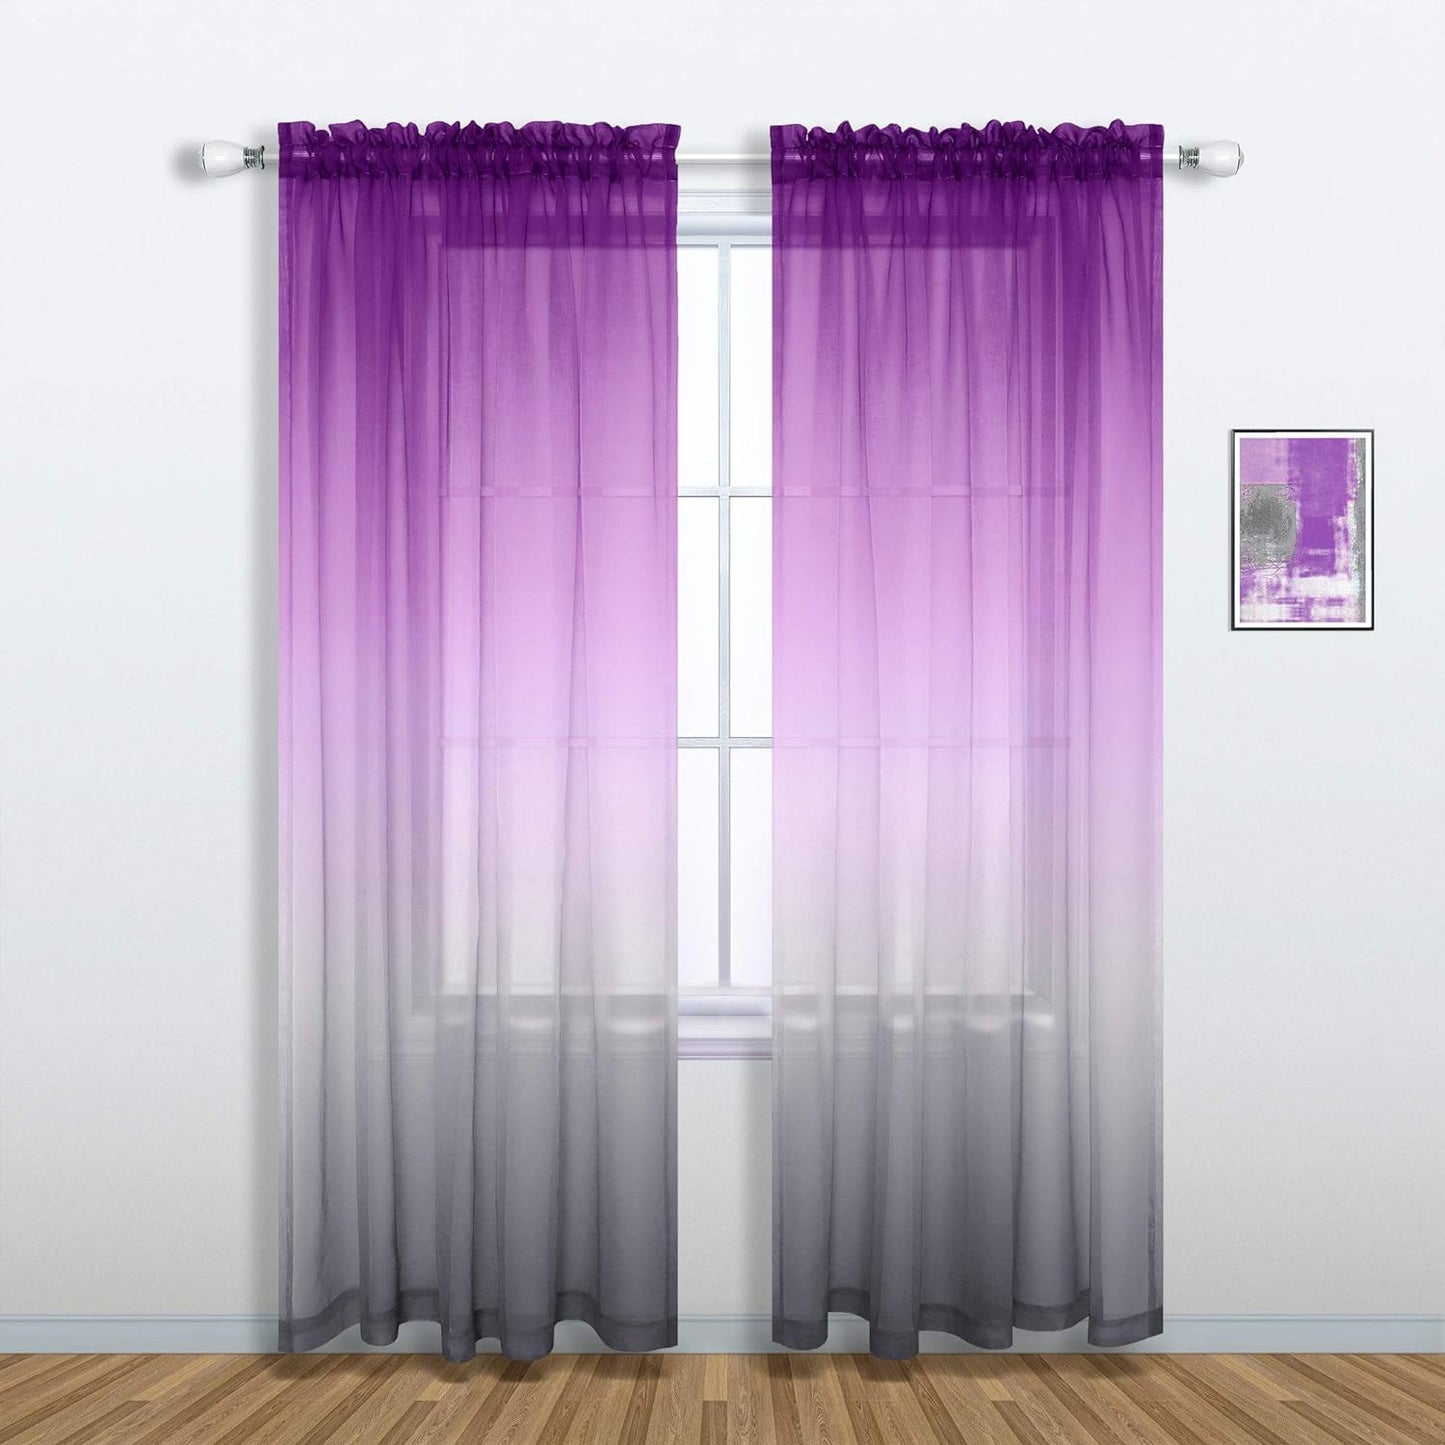 Pink and Purple Curtains for Girls Bedroom Decor Set 1 Single Panel Pocket Window Voile Pastel Sheer Ombre Rainbow Curtain for Kid Room Decoration Teen Princess 63 Inch Length Gradient Lilac Lavender  MRS.NATURALL TEXTILE Purple And Gray 52X84 